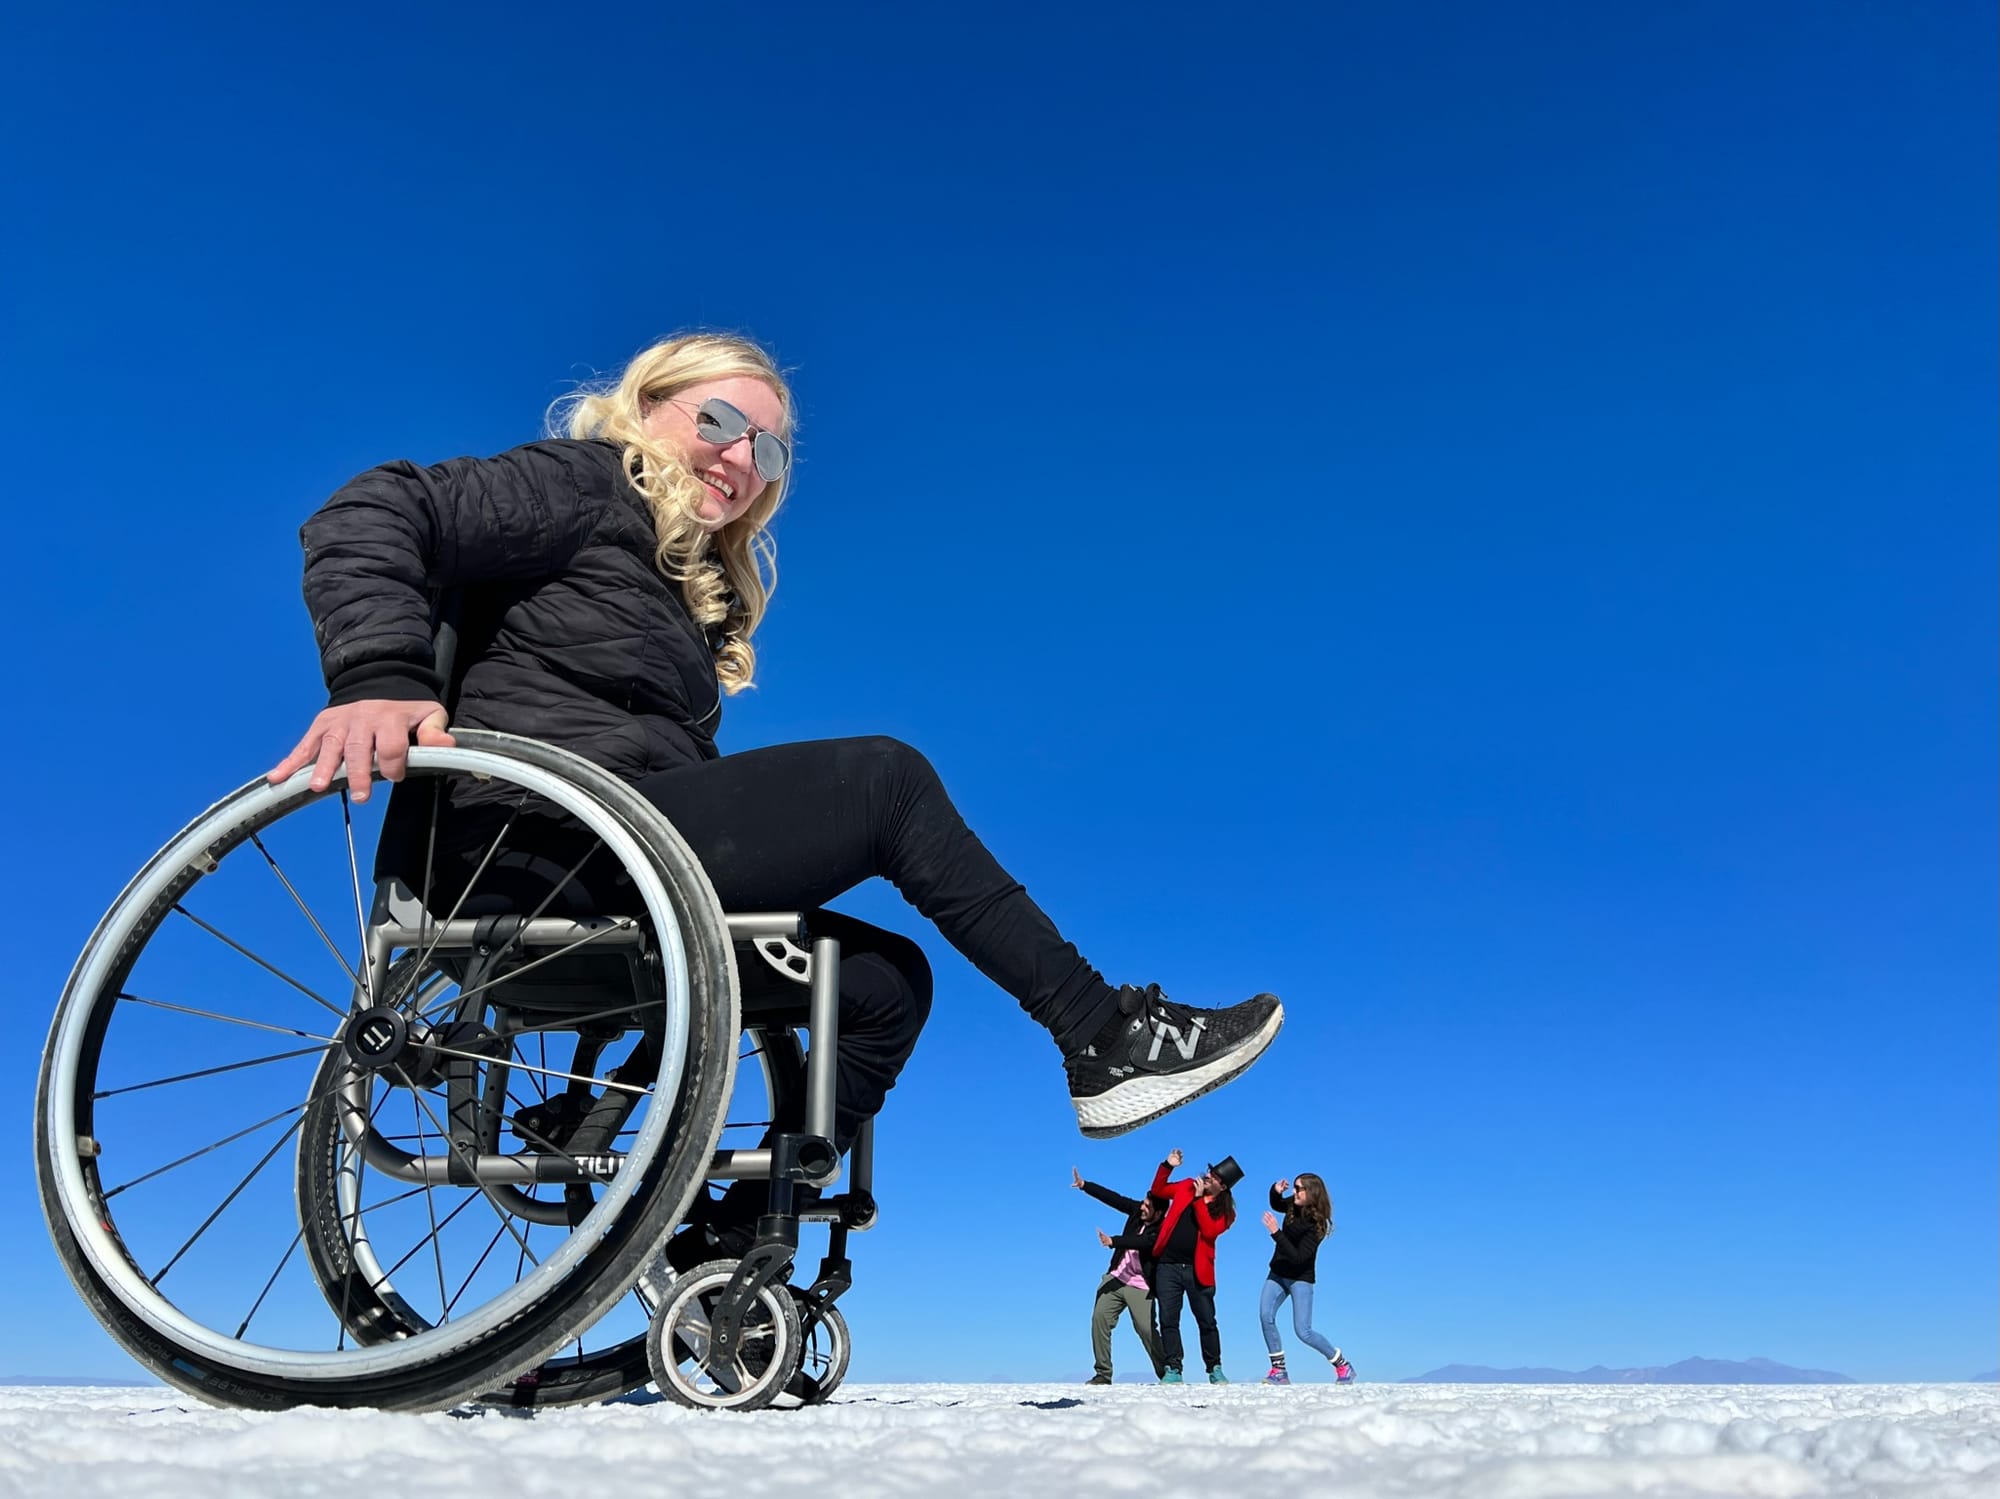 Wheelchair user posing with people at the Uyuni Salt Flat in Bolivia